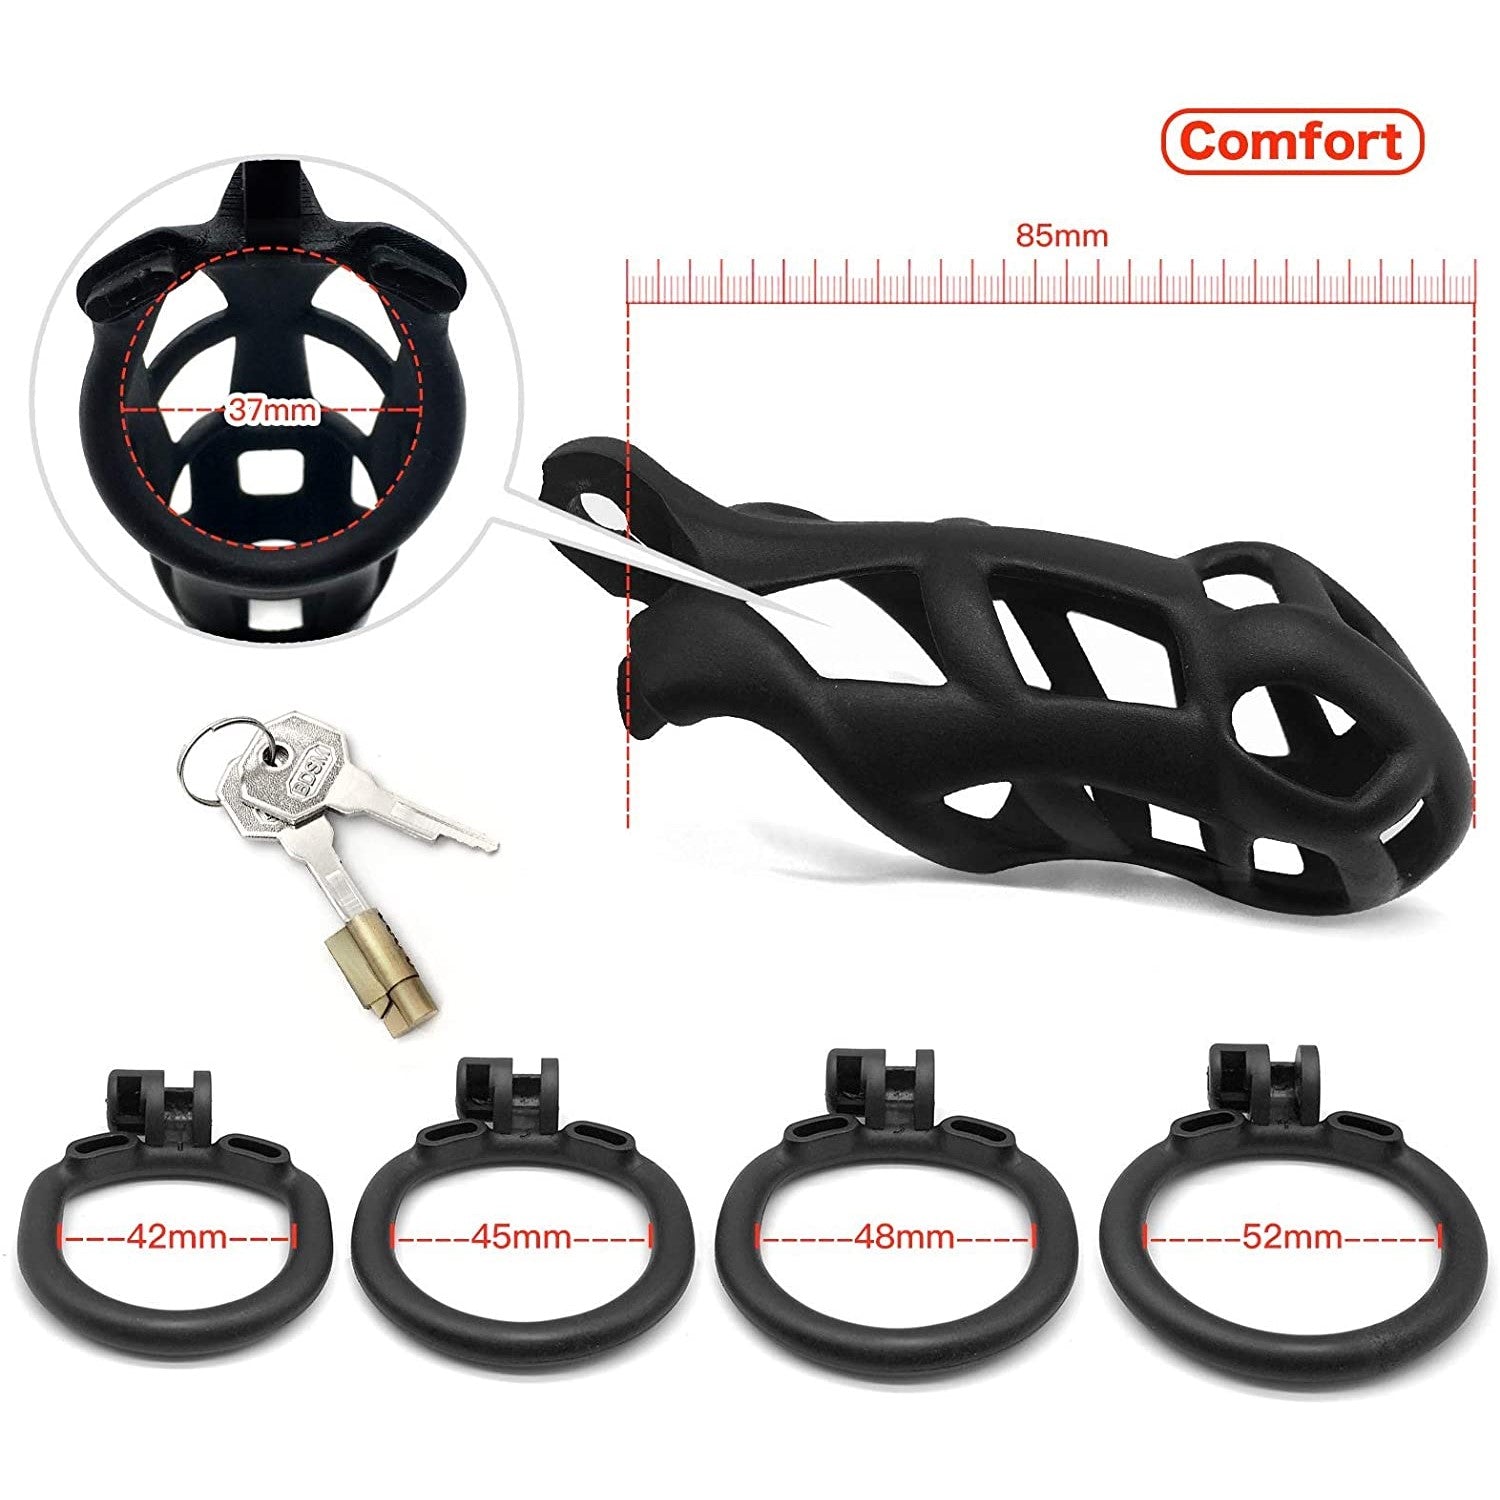 Cobra Male Chastity Device Kit 1.97 to 3.94 inches Long – CHASTITY